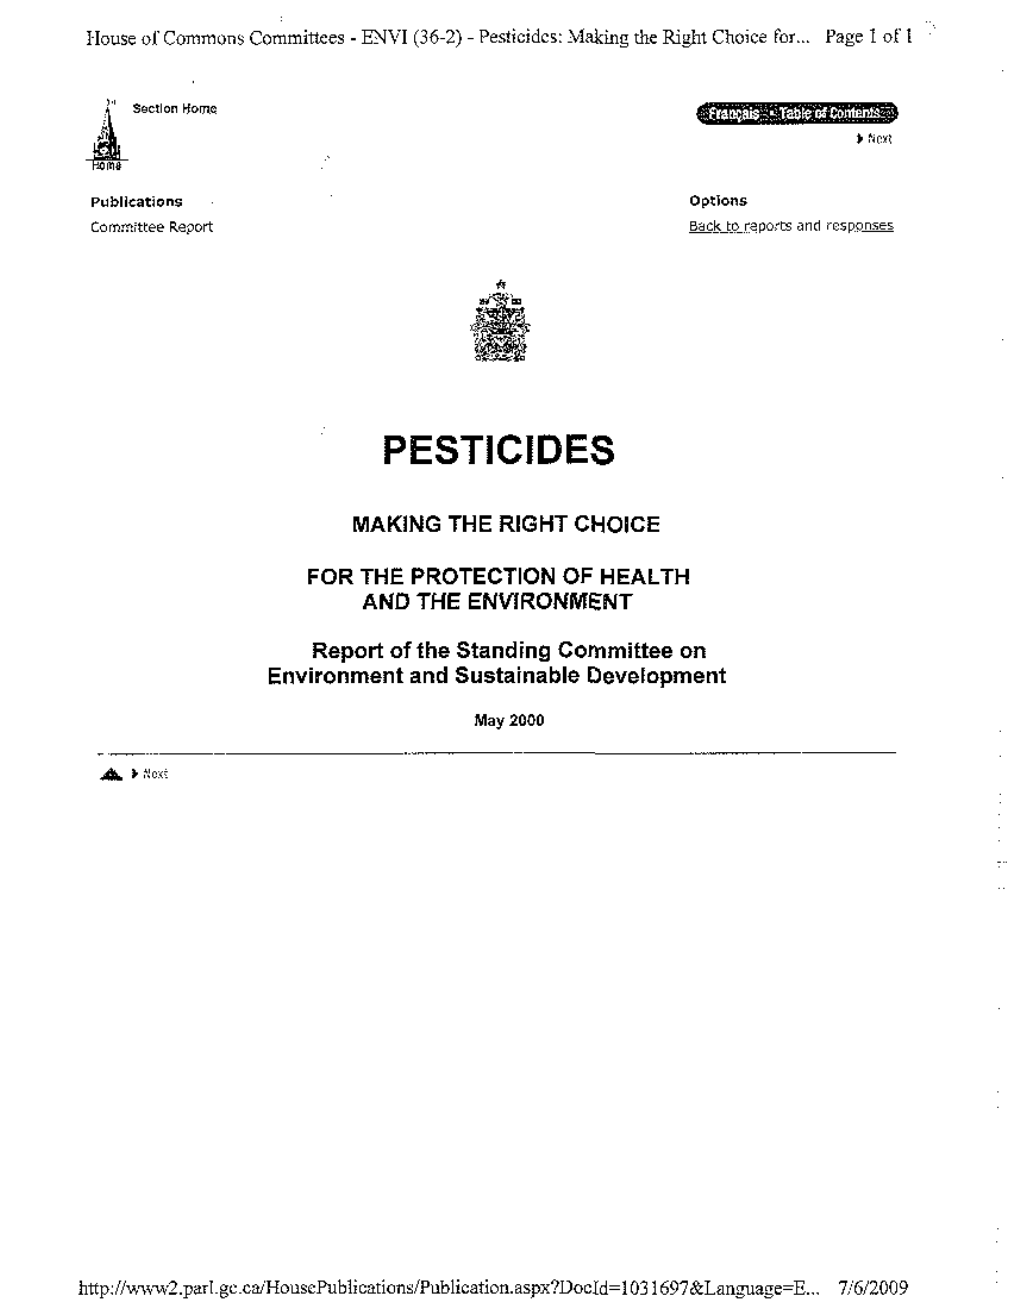 Pesticides: Making the Right Choice For